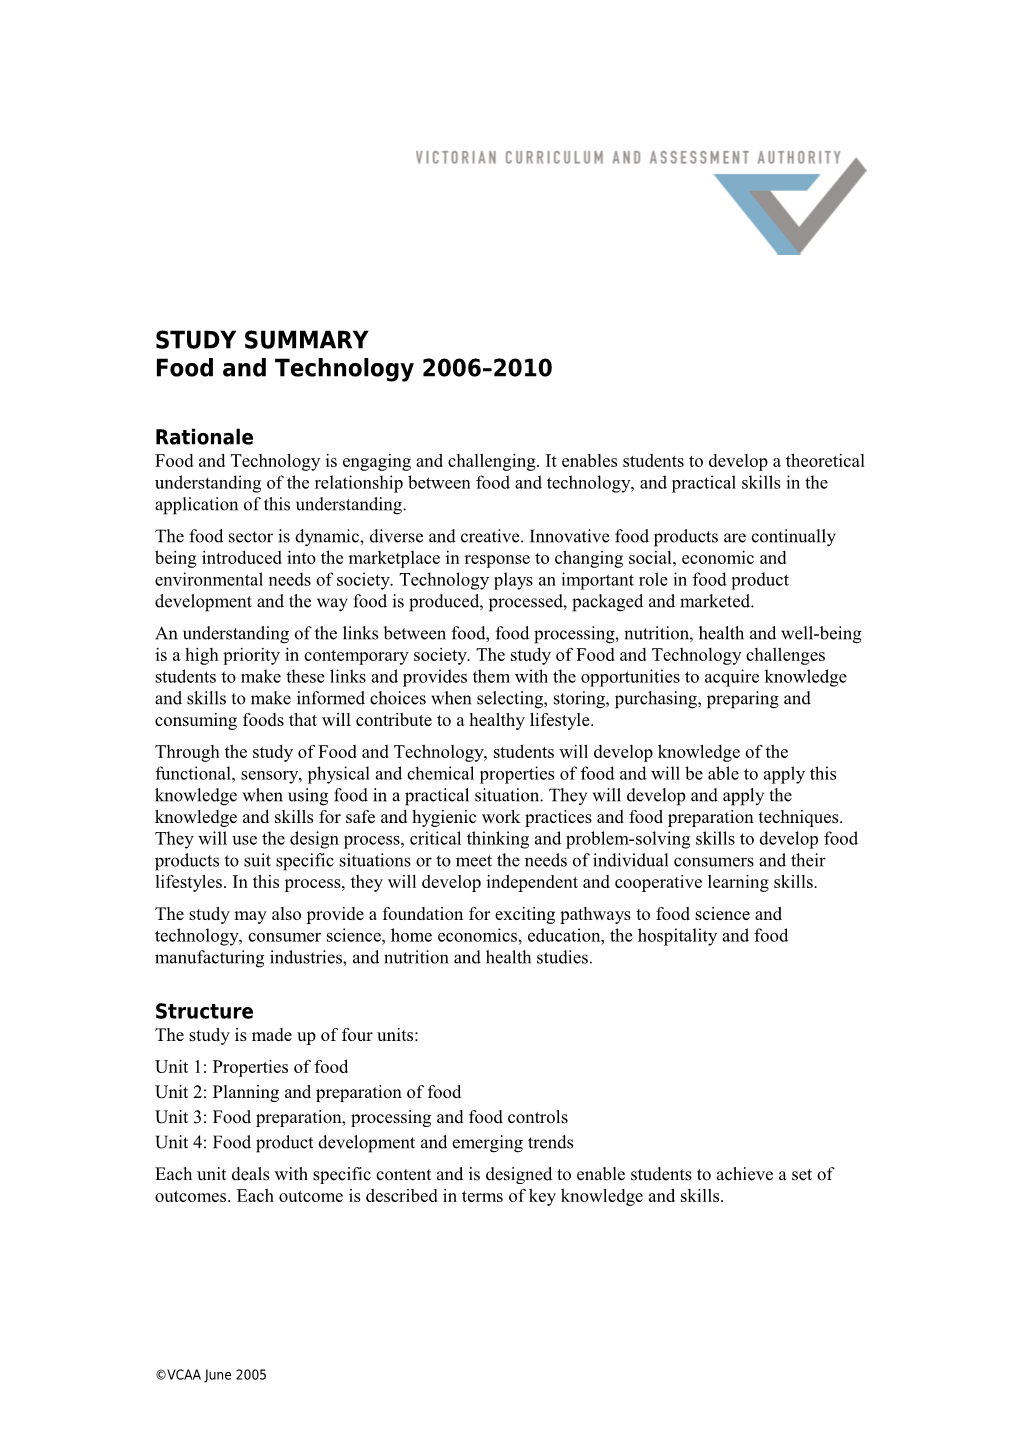 VCE Food and Technology 2006 2010STUDY SUMMARY